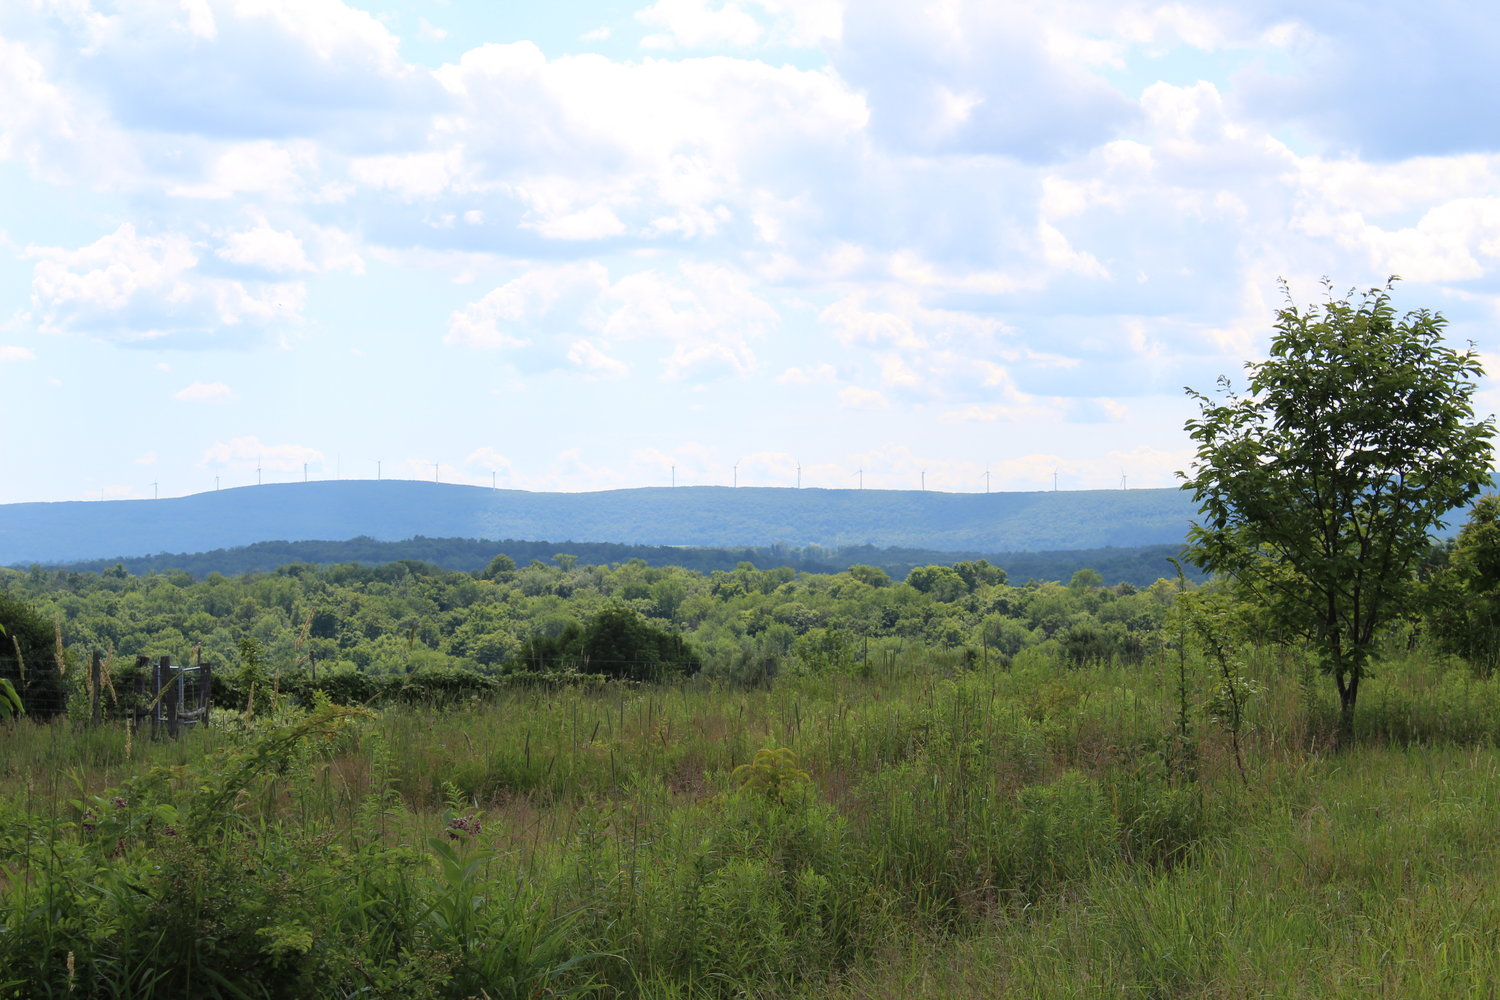 Wind farm in the distance, as seen from Anthill Farm near Honesdale.